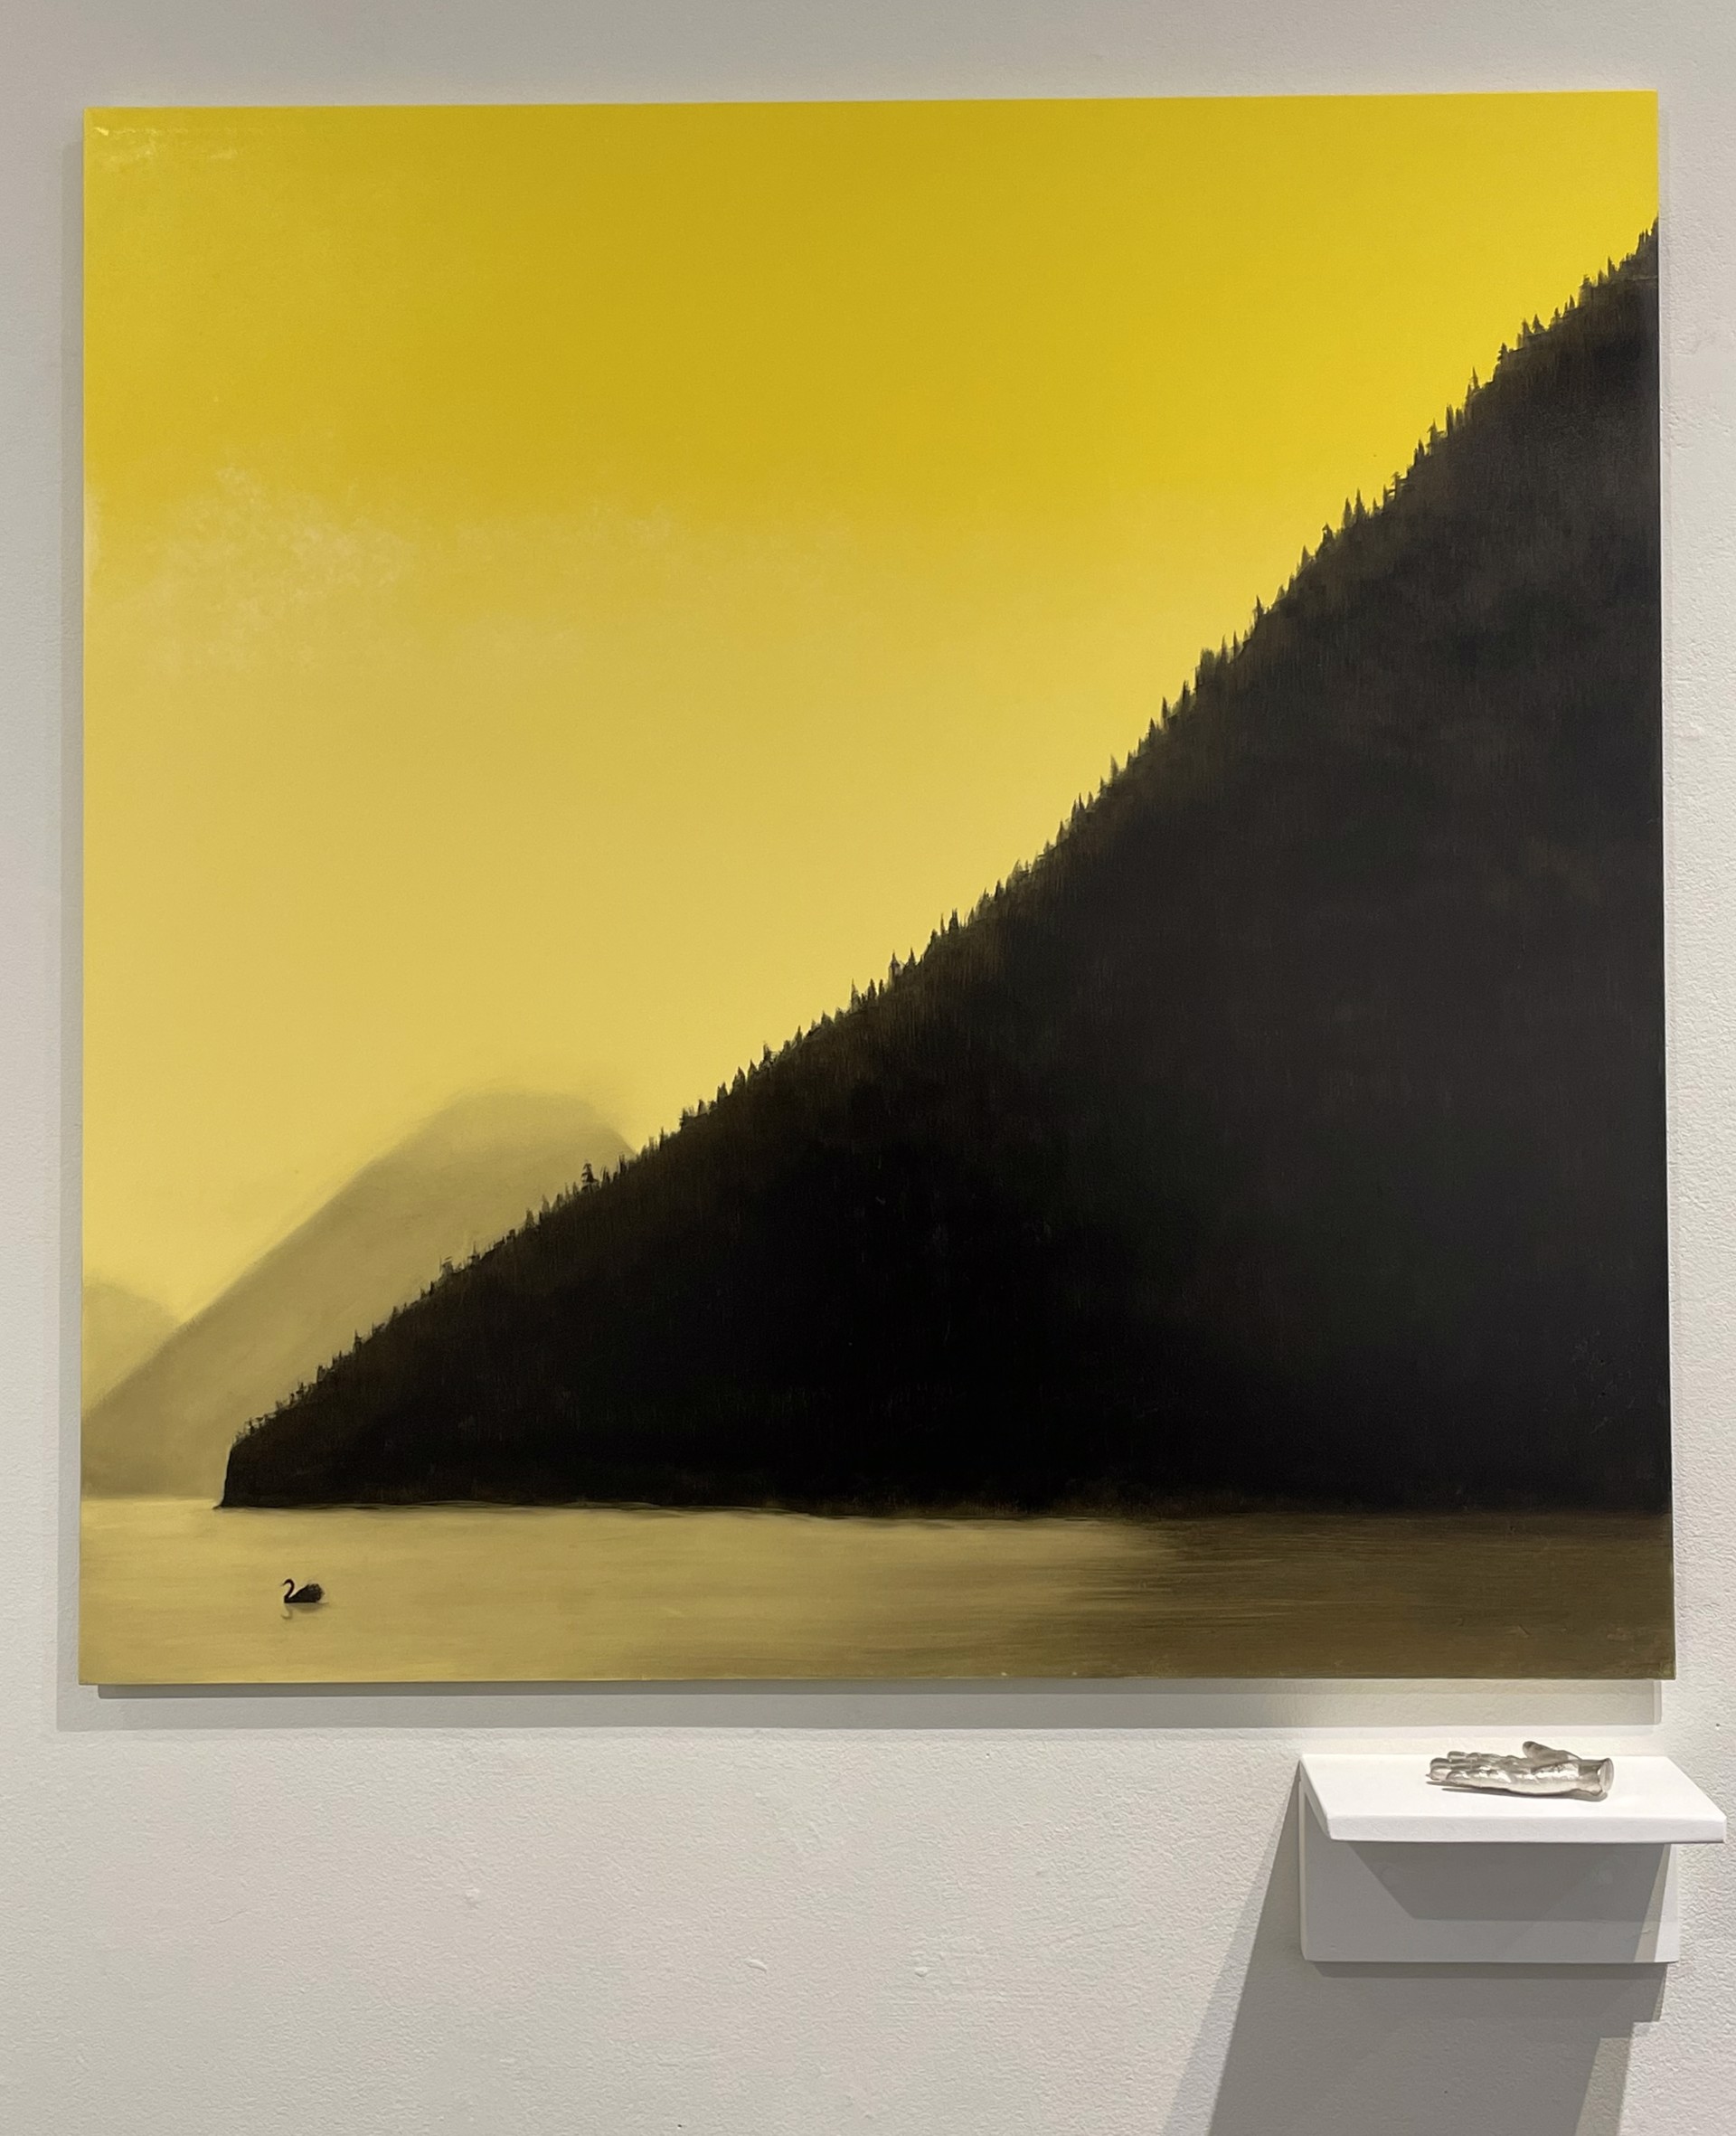 Startling Beauty and Anomie (Yellow) by Lauren Ewing